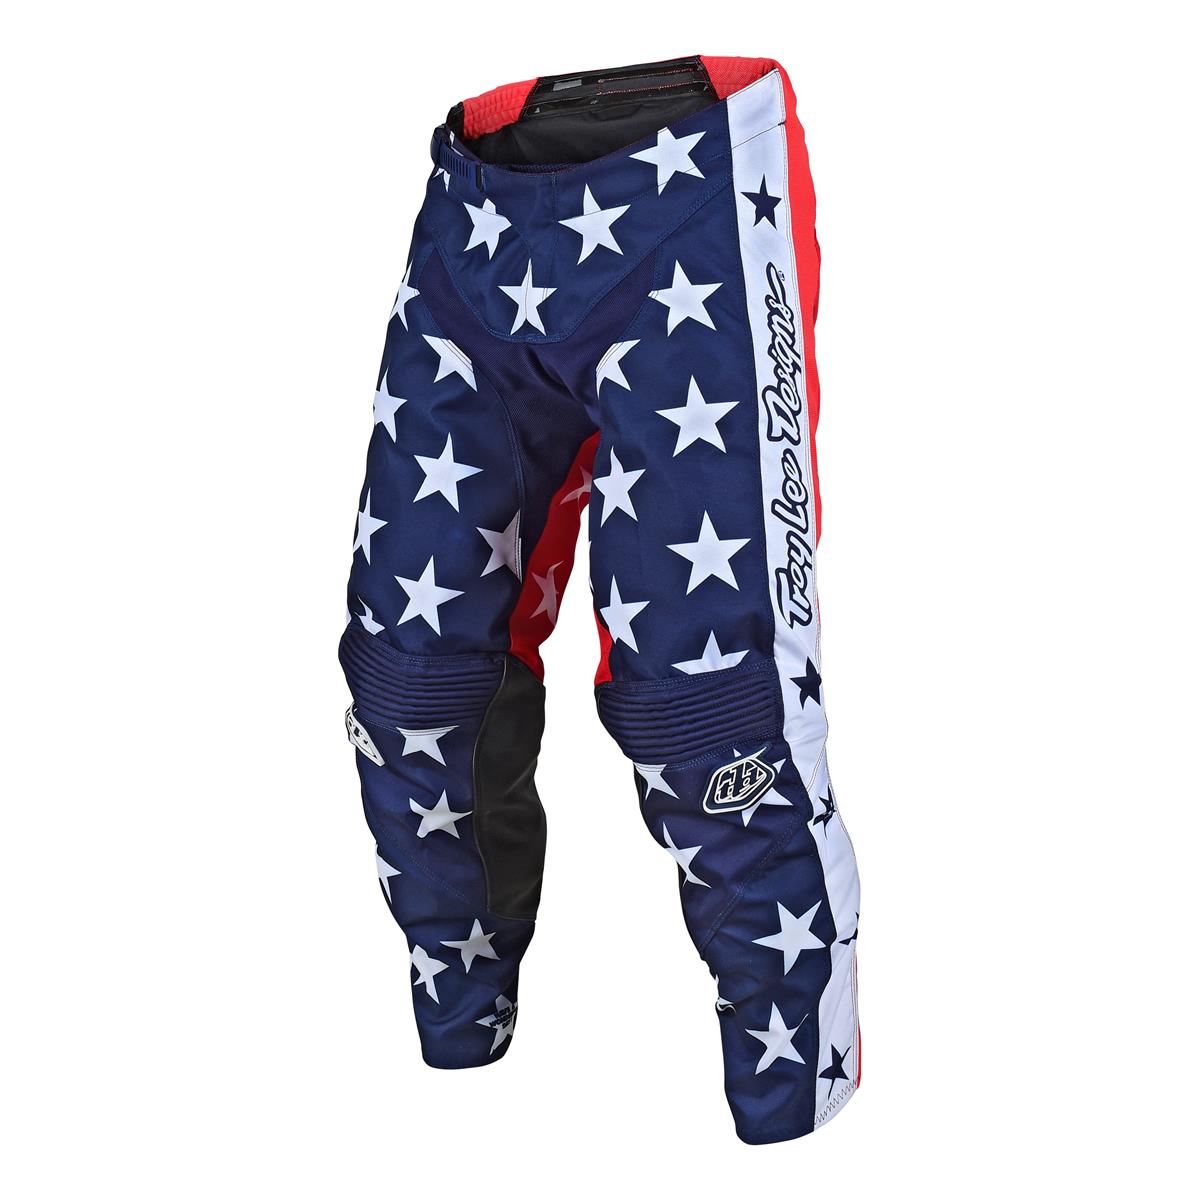 Troy Lee Designs Pantaloni MX GP Independence Navy/Red - Limited Edition San Diego